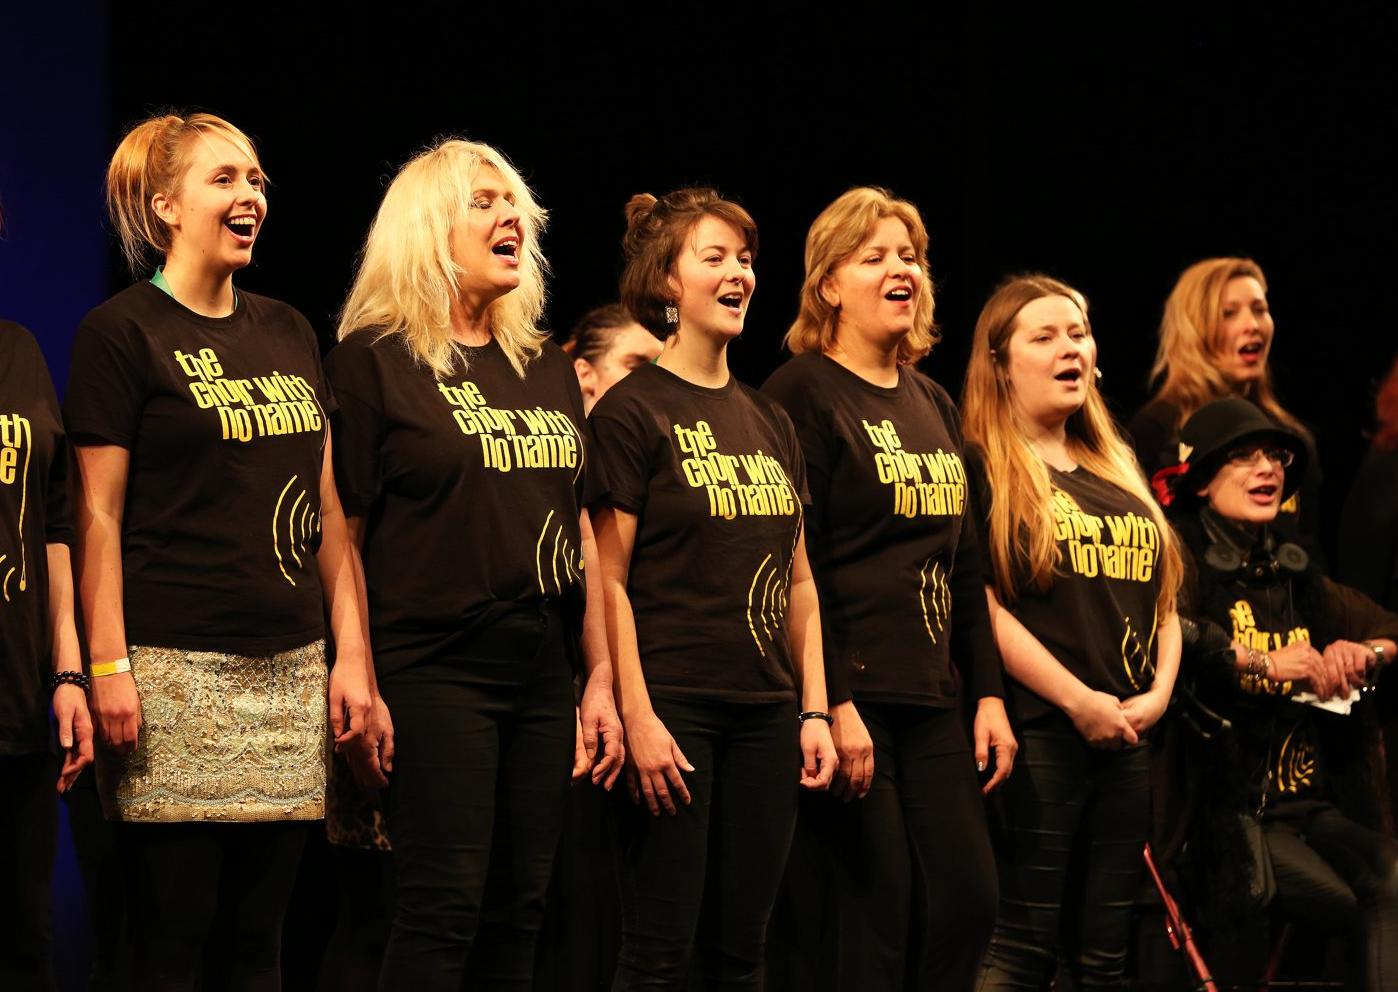 Brighton Choir With No Name perform at the event for Homelink's 20th anniversary. Photograph: Sam Stephenson/ Homelink